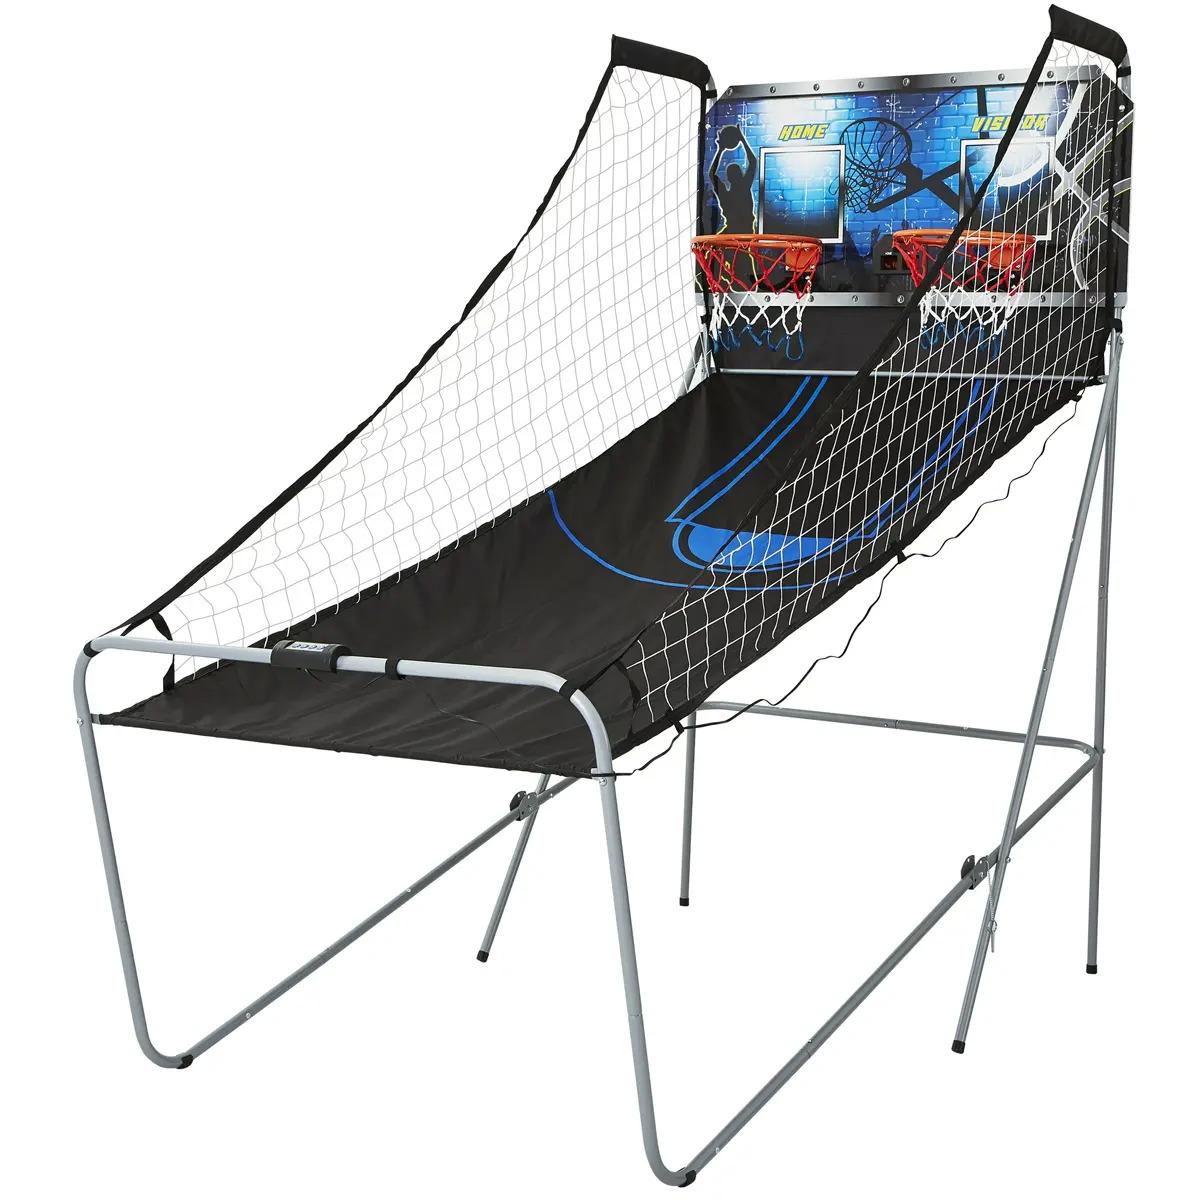 MD Sports Best Shot 2-Player 81 inch Foldable Arcade Basketball Game for $49 Shipped